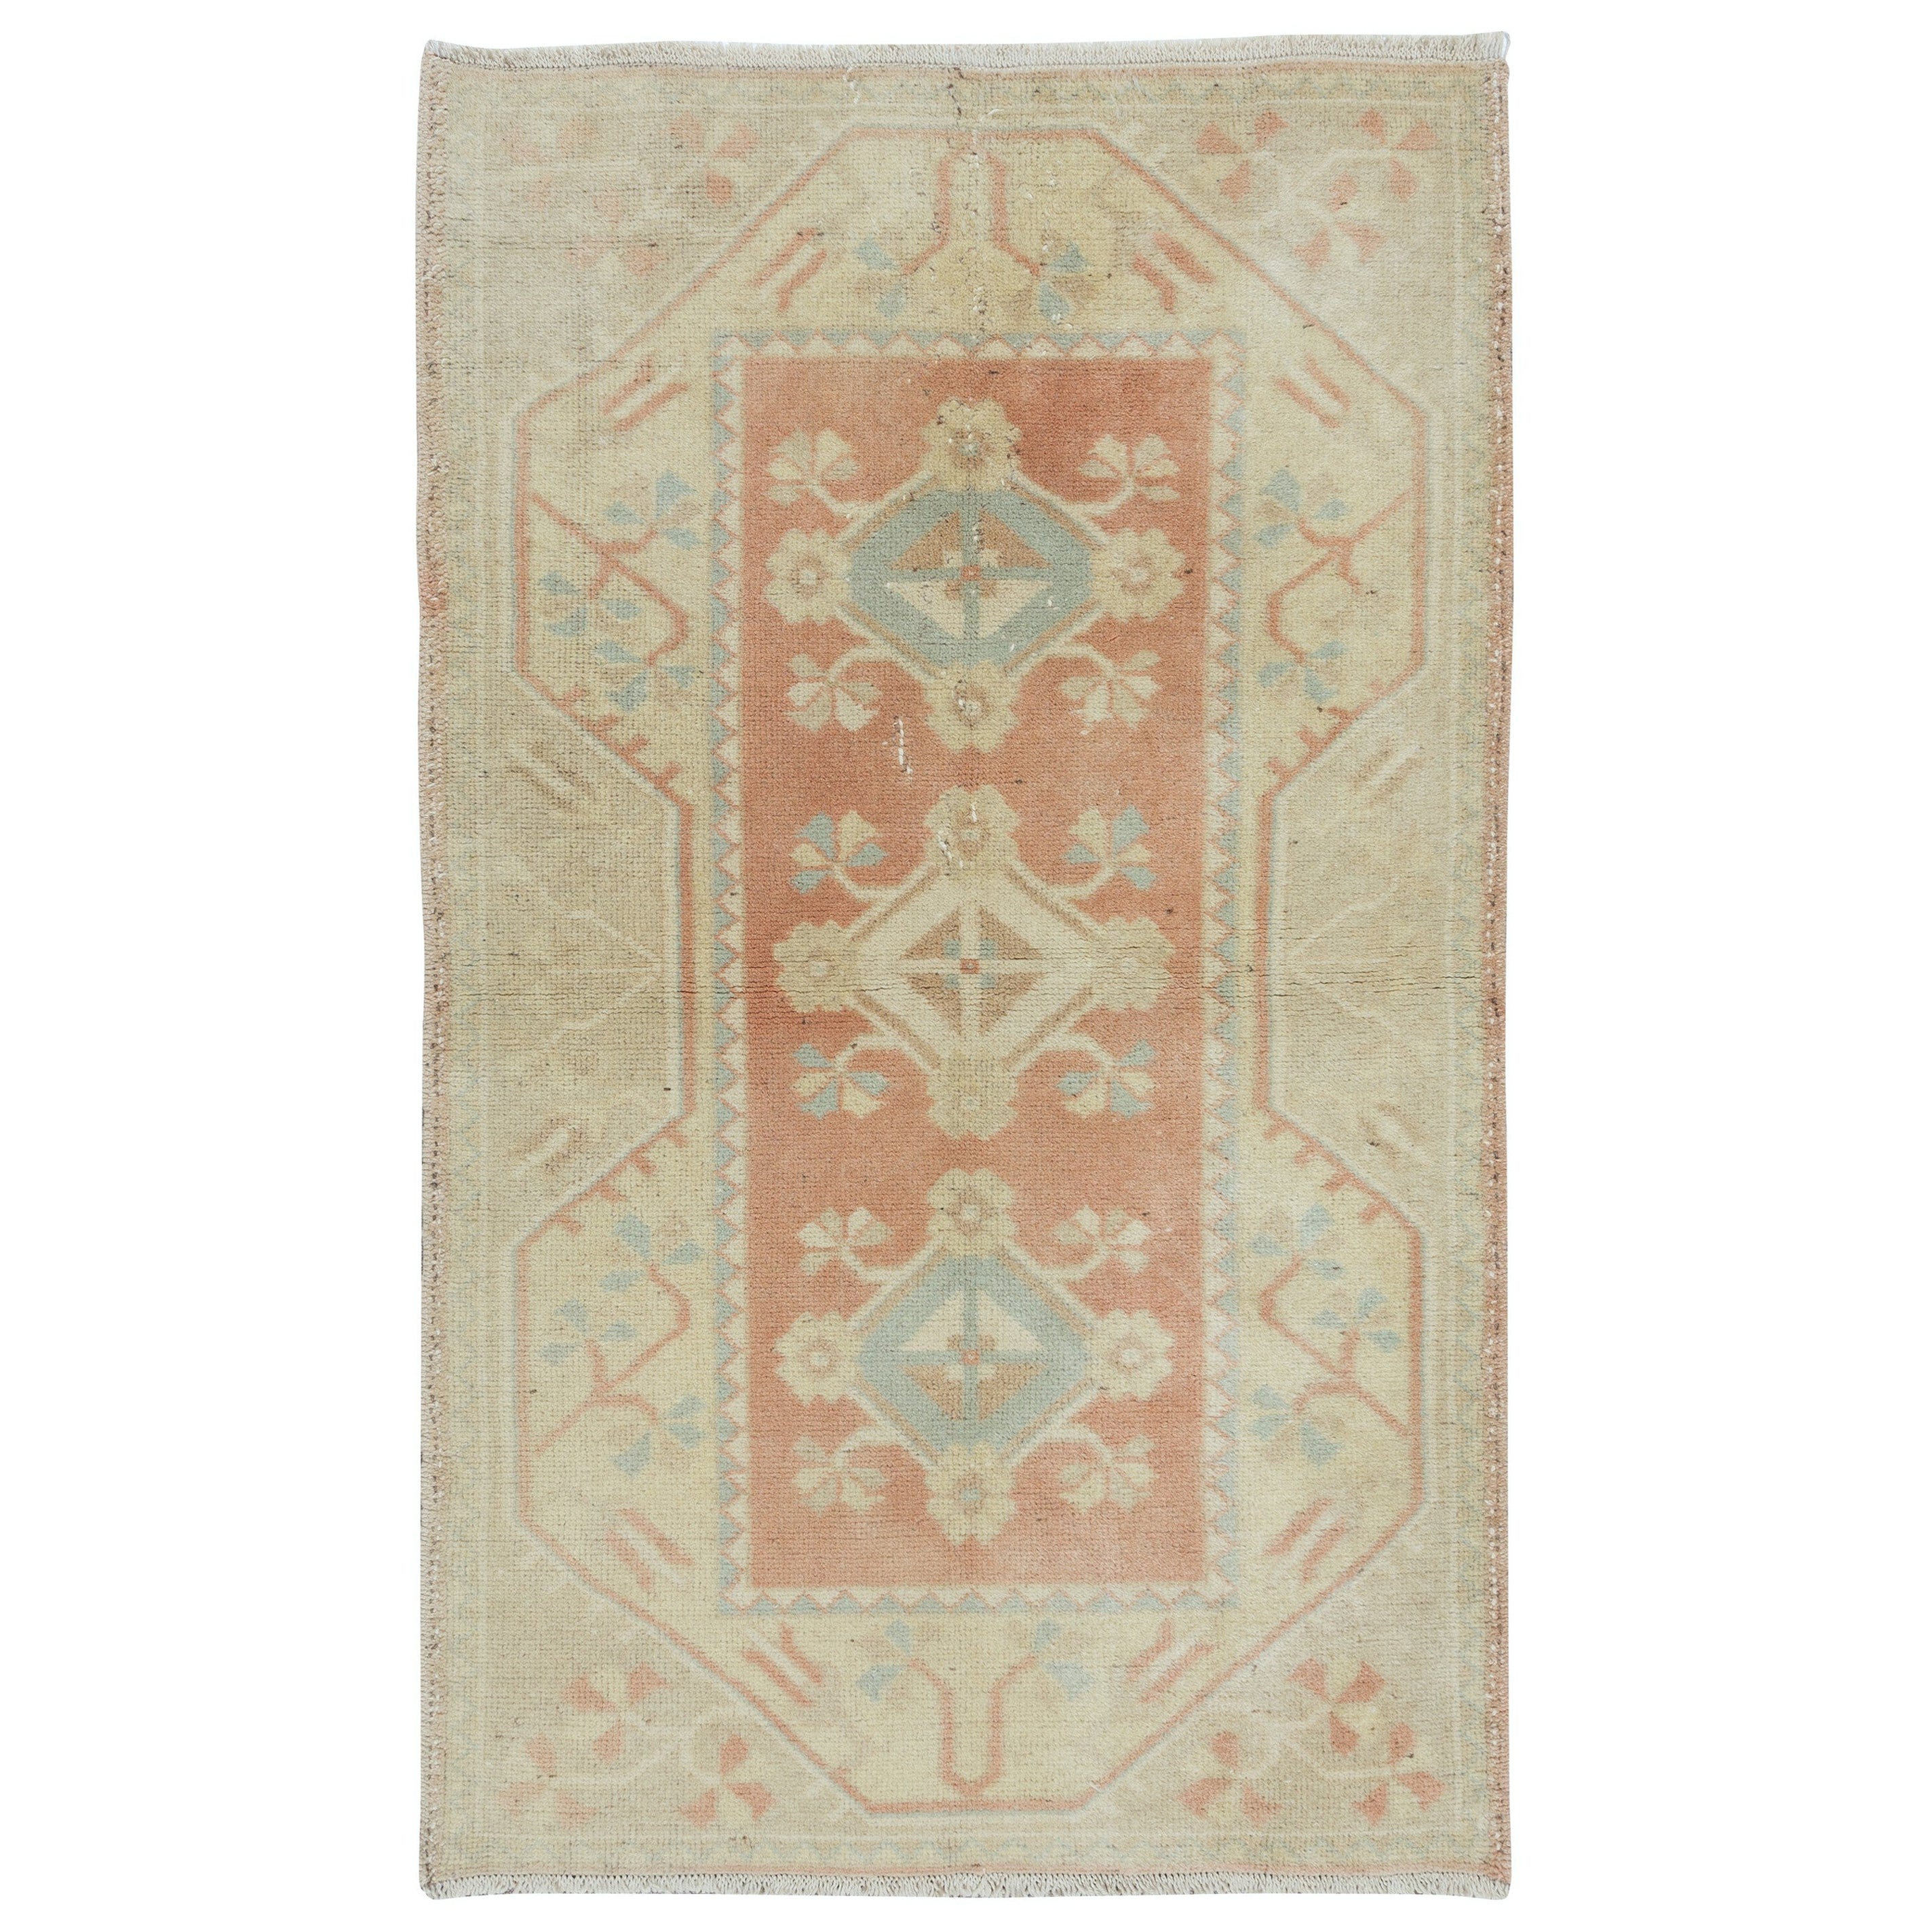 2.6x4.2 Ft Faded Vintage Handmade Turkish Milas Accent Rug in Soft Red & Beige For Sale